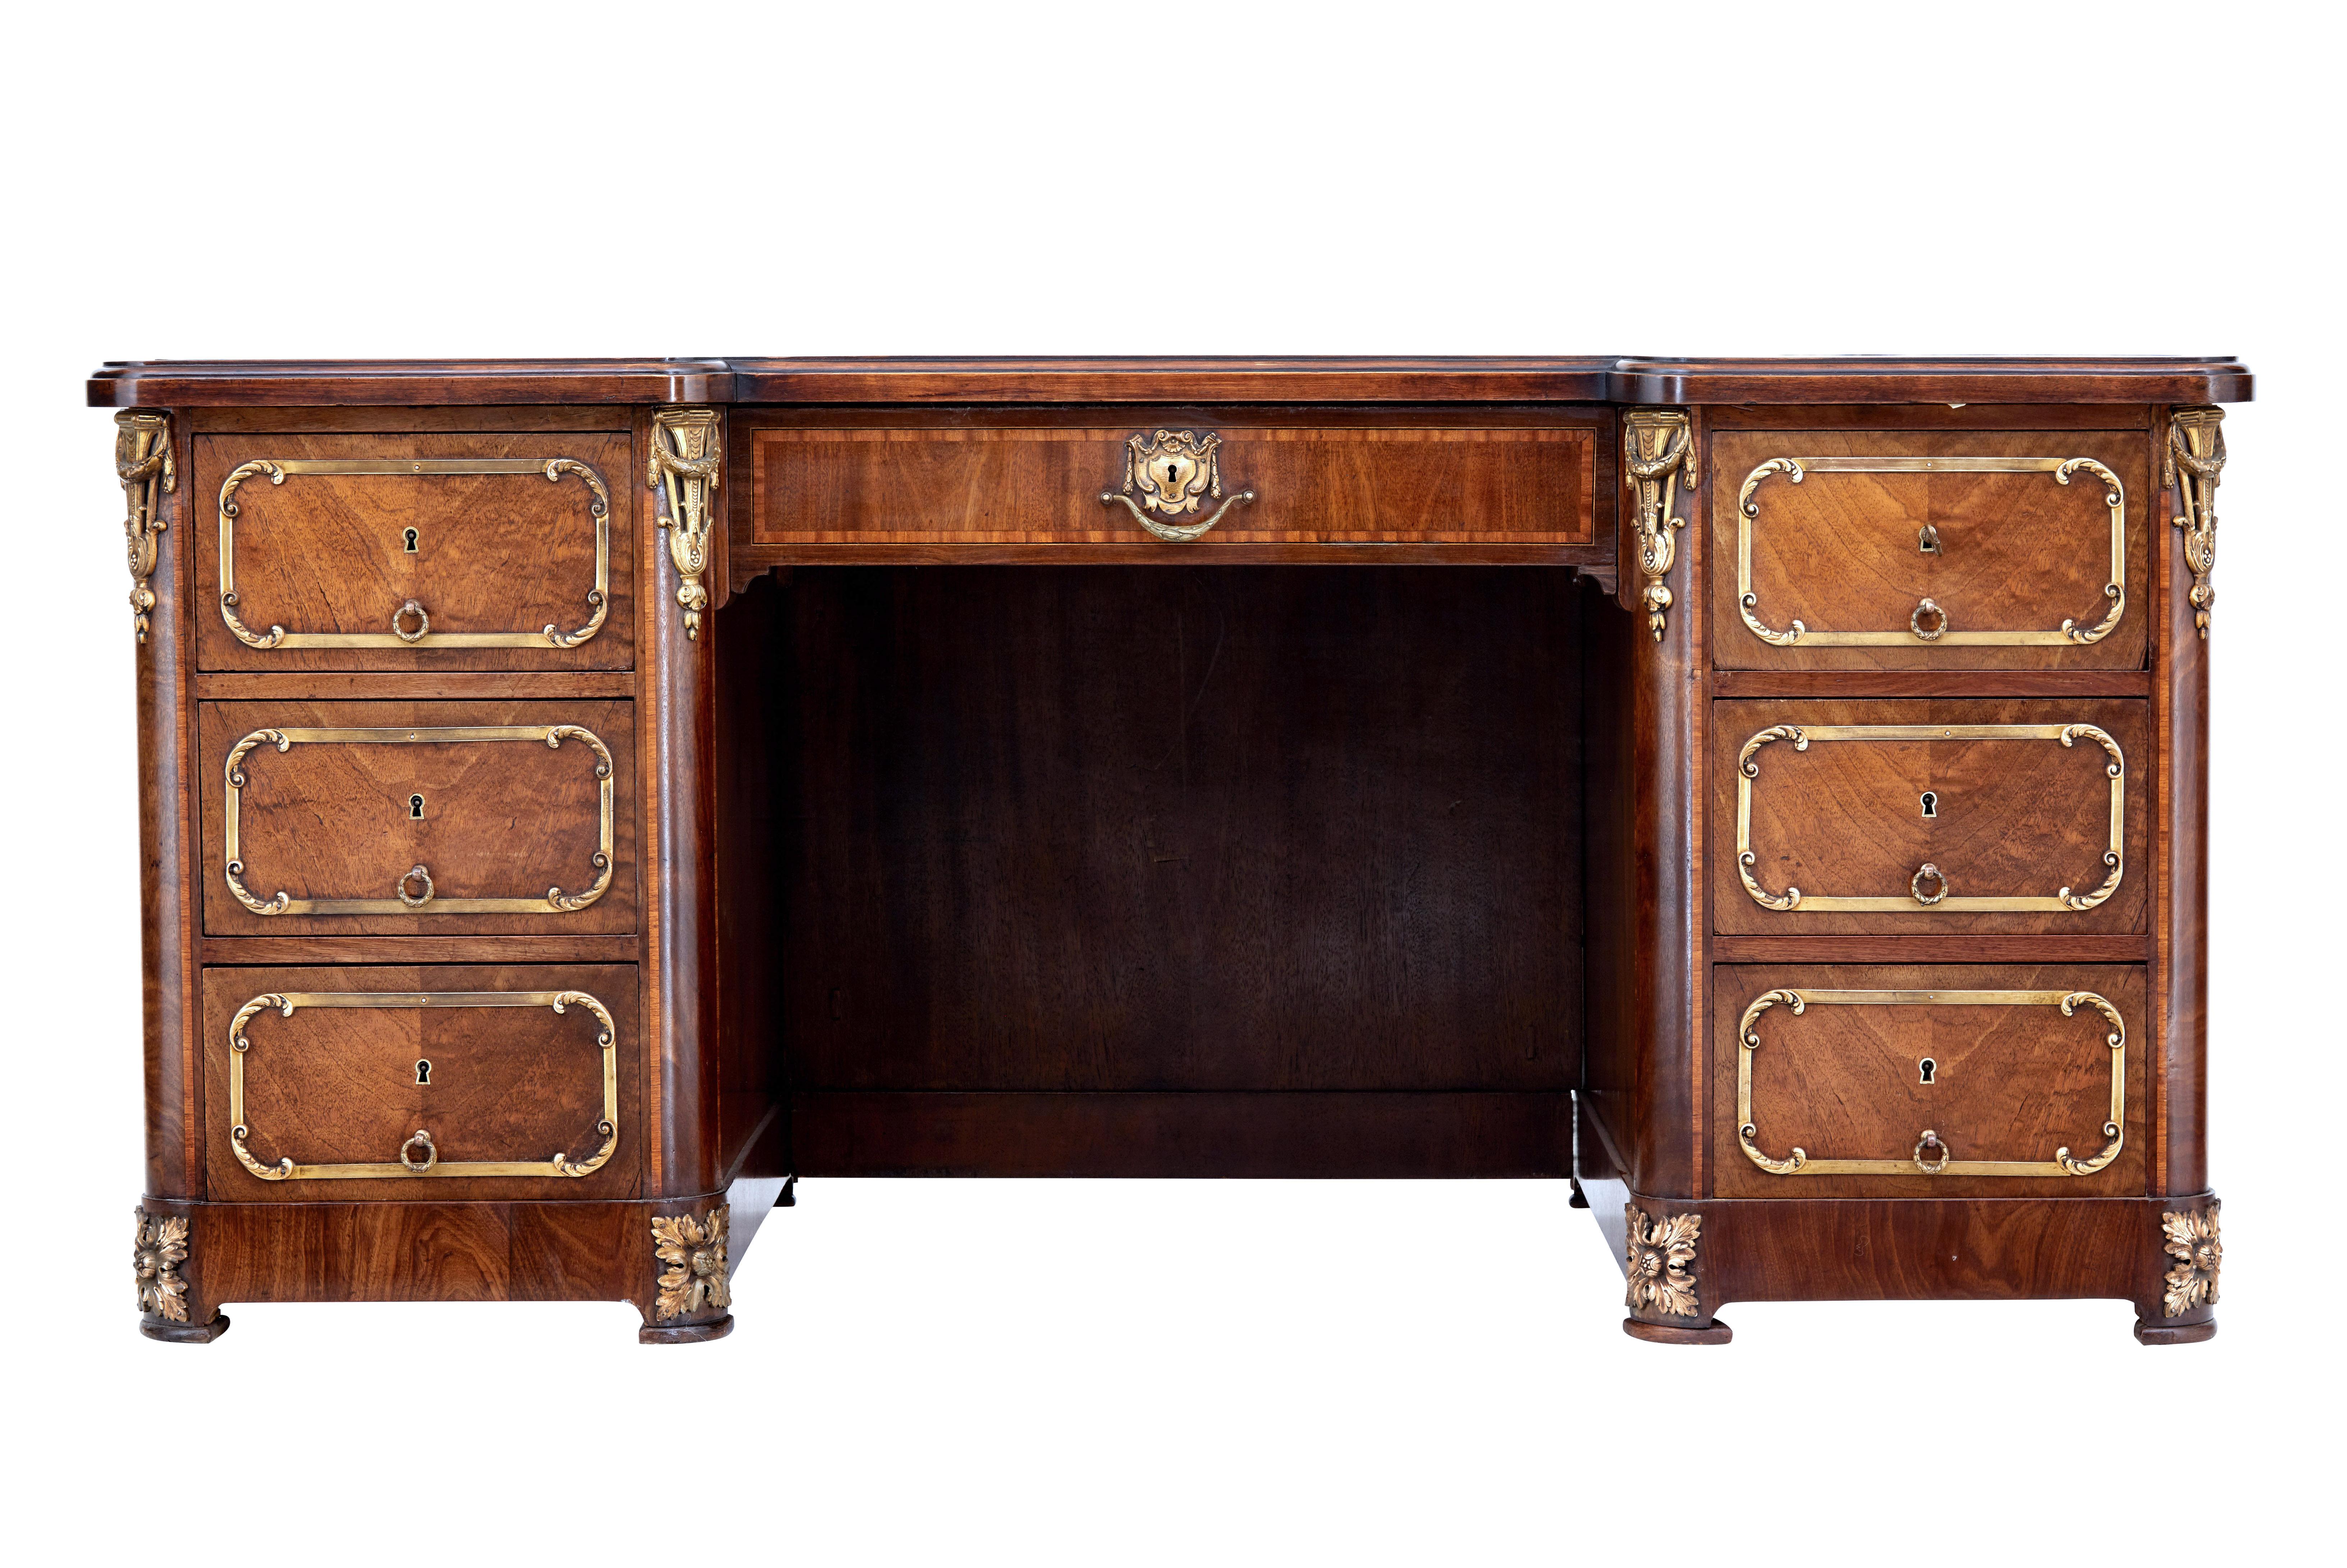 Beautiful French empire mahogany desk, circa 1890.

As typical with desks of this period and size it was made to be taken apart, comprising of 2 pedestals, panel to foot well, front drawer and separate top.

Top surface with original gold tooled